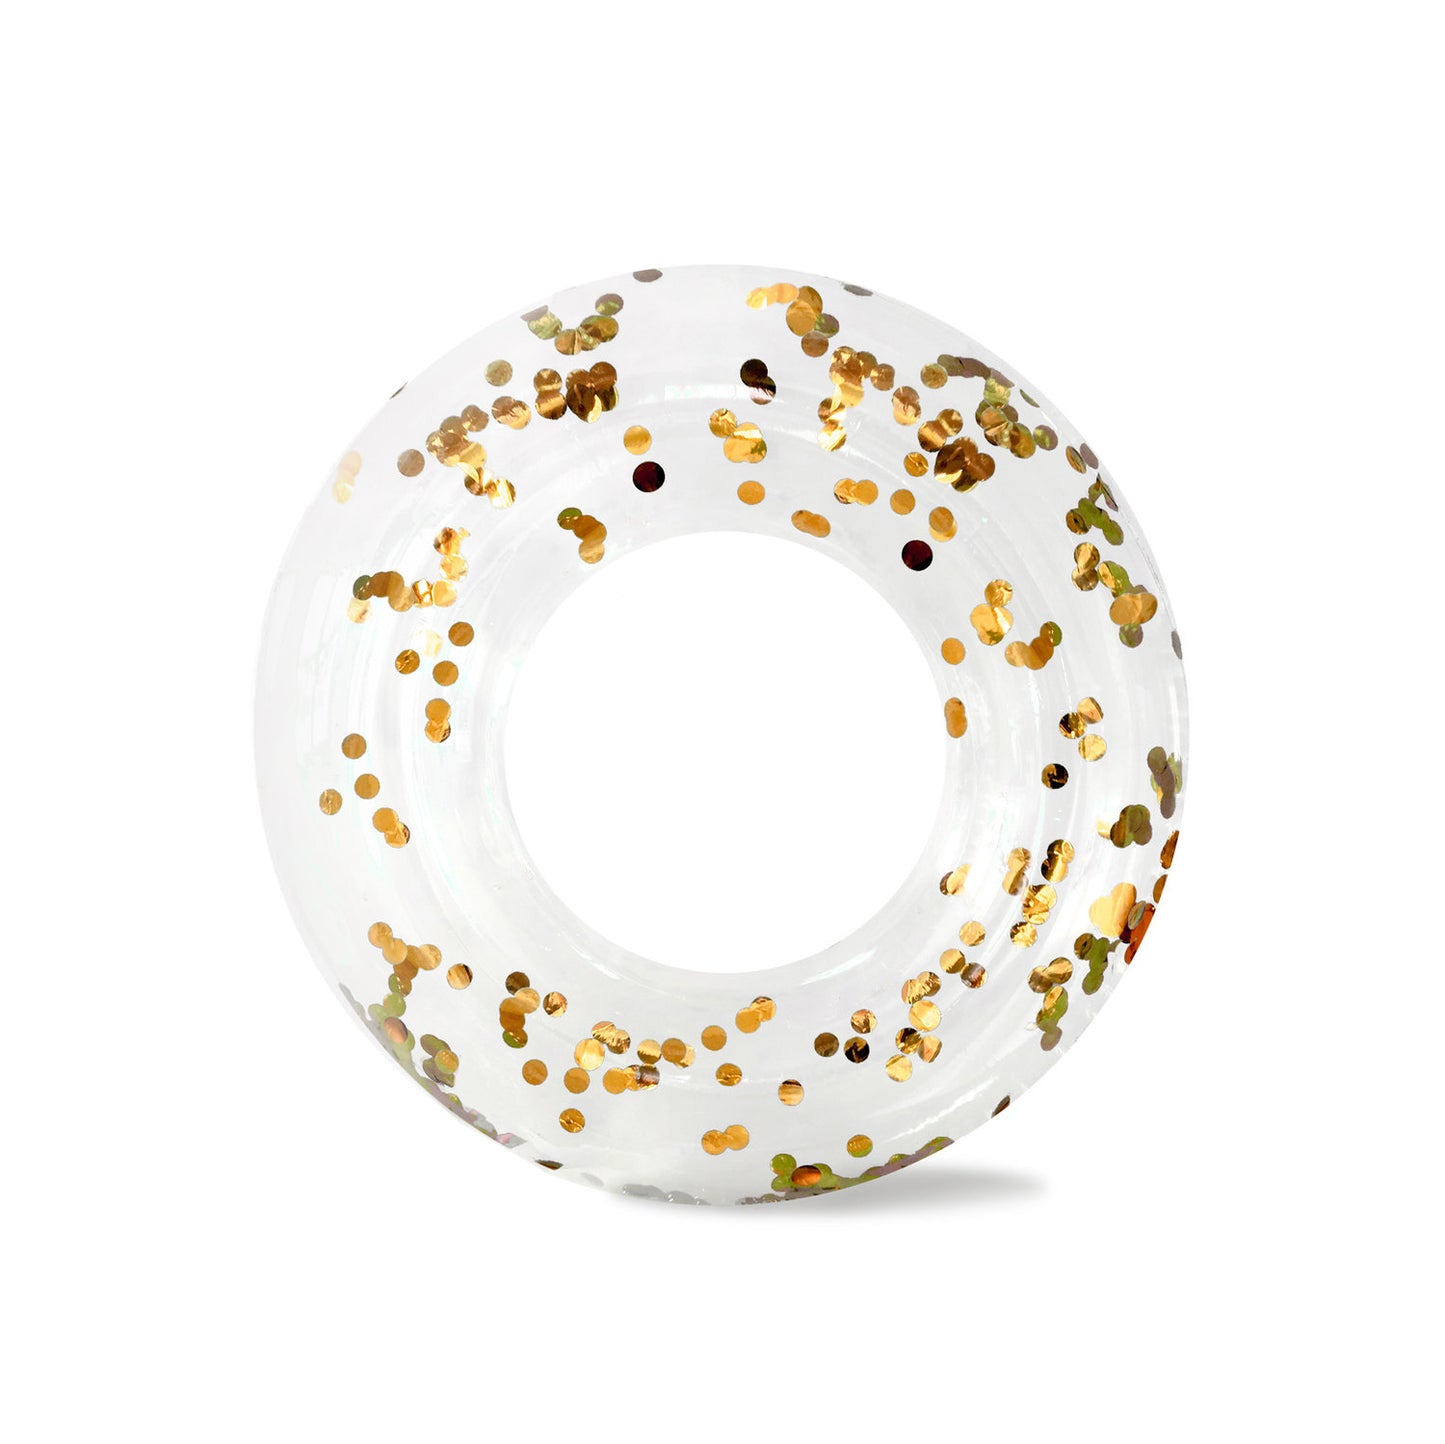 the CUE THE CONFETTI! RING FLOAT in GOLD